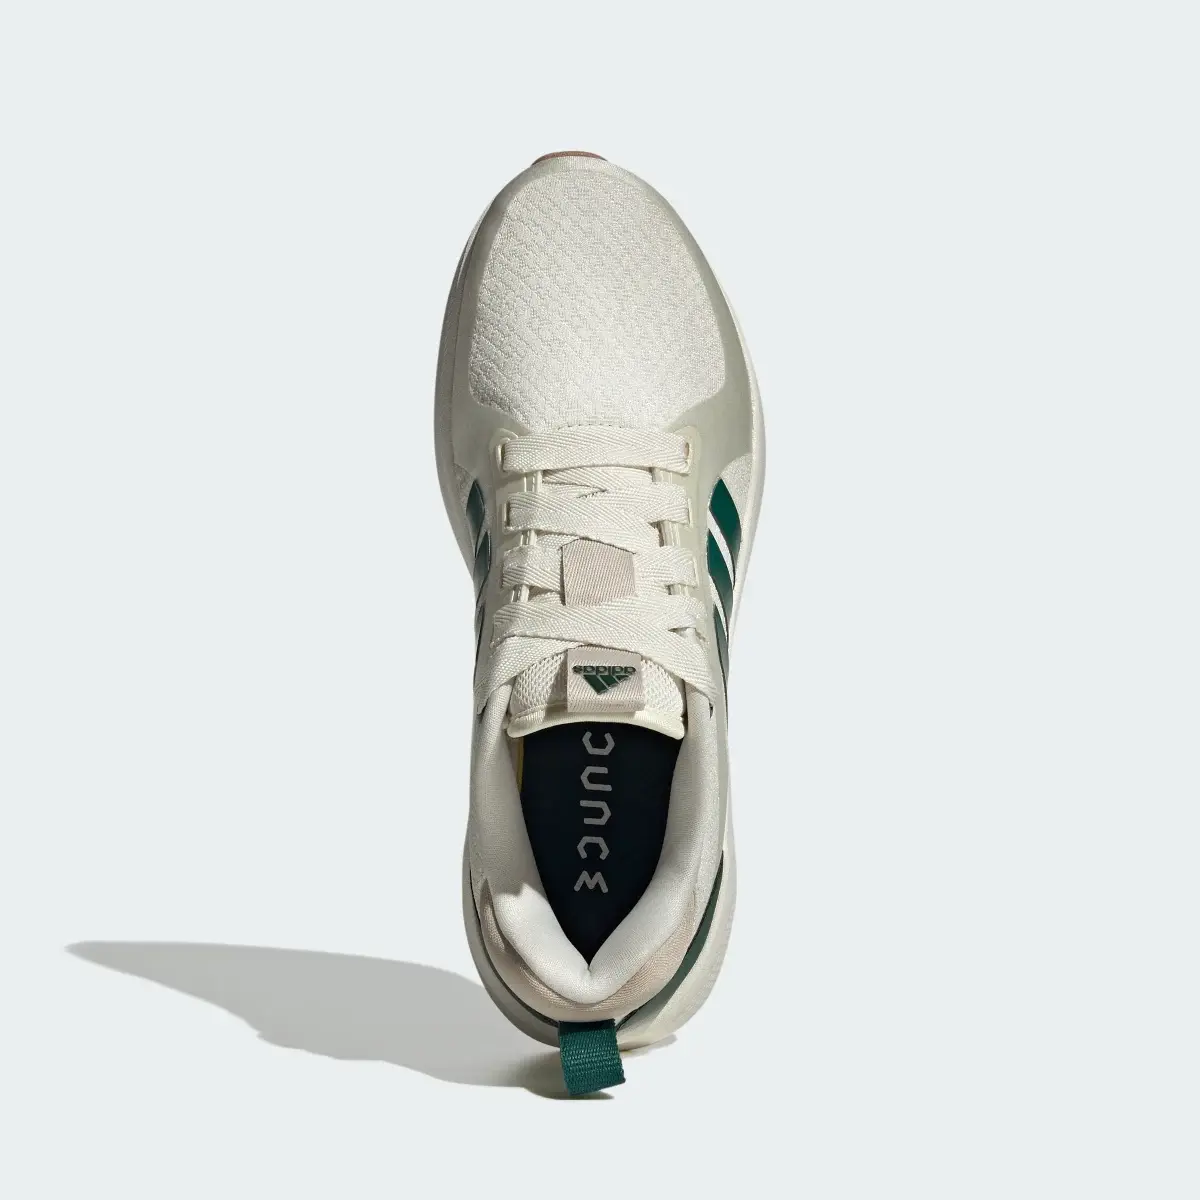 Adidas Edge Lux 6.0 Shoes. 3